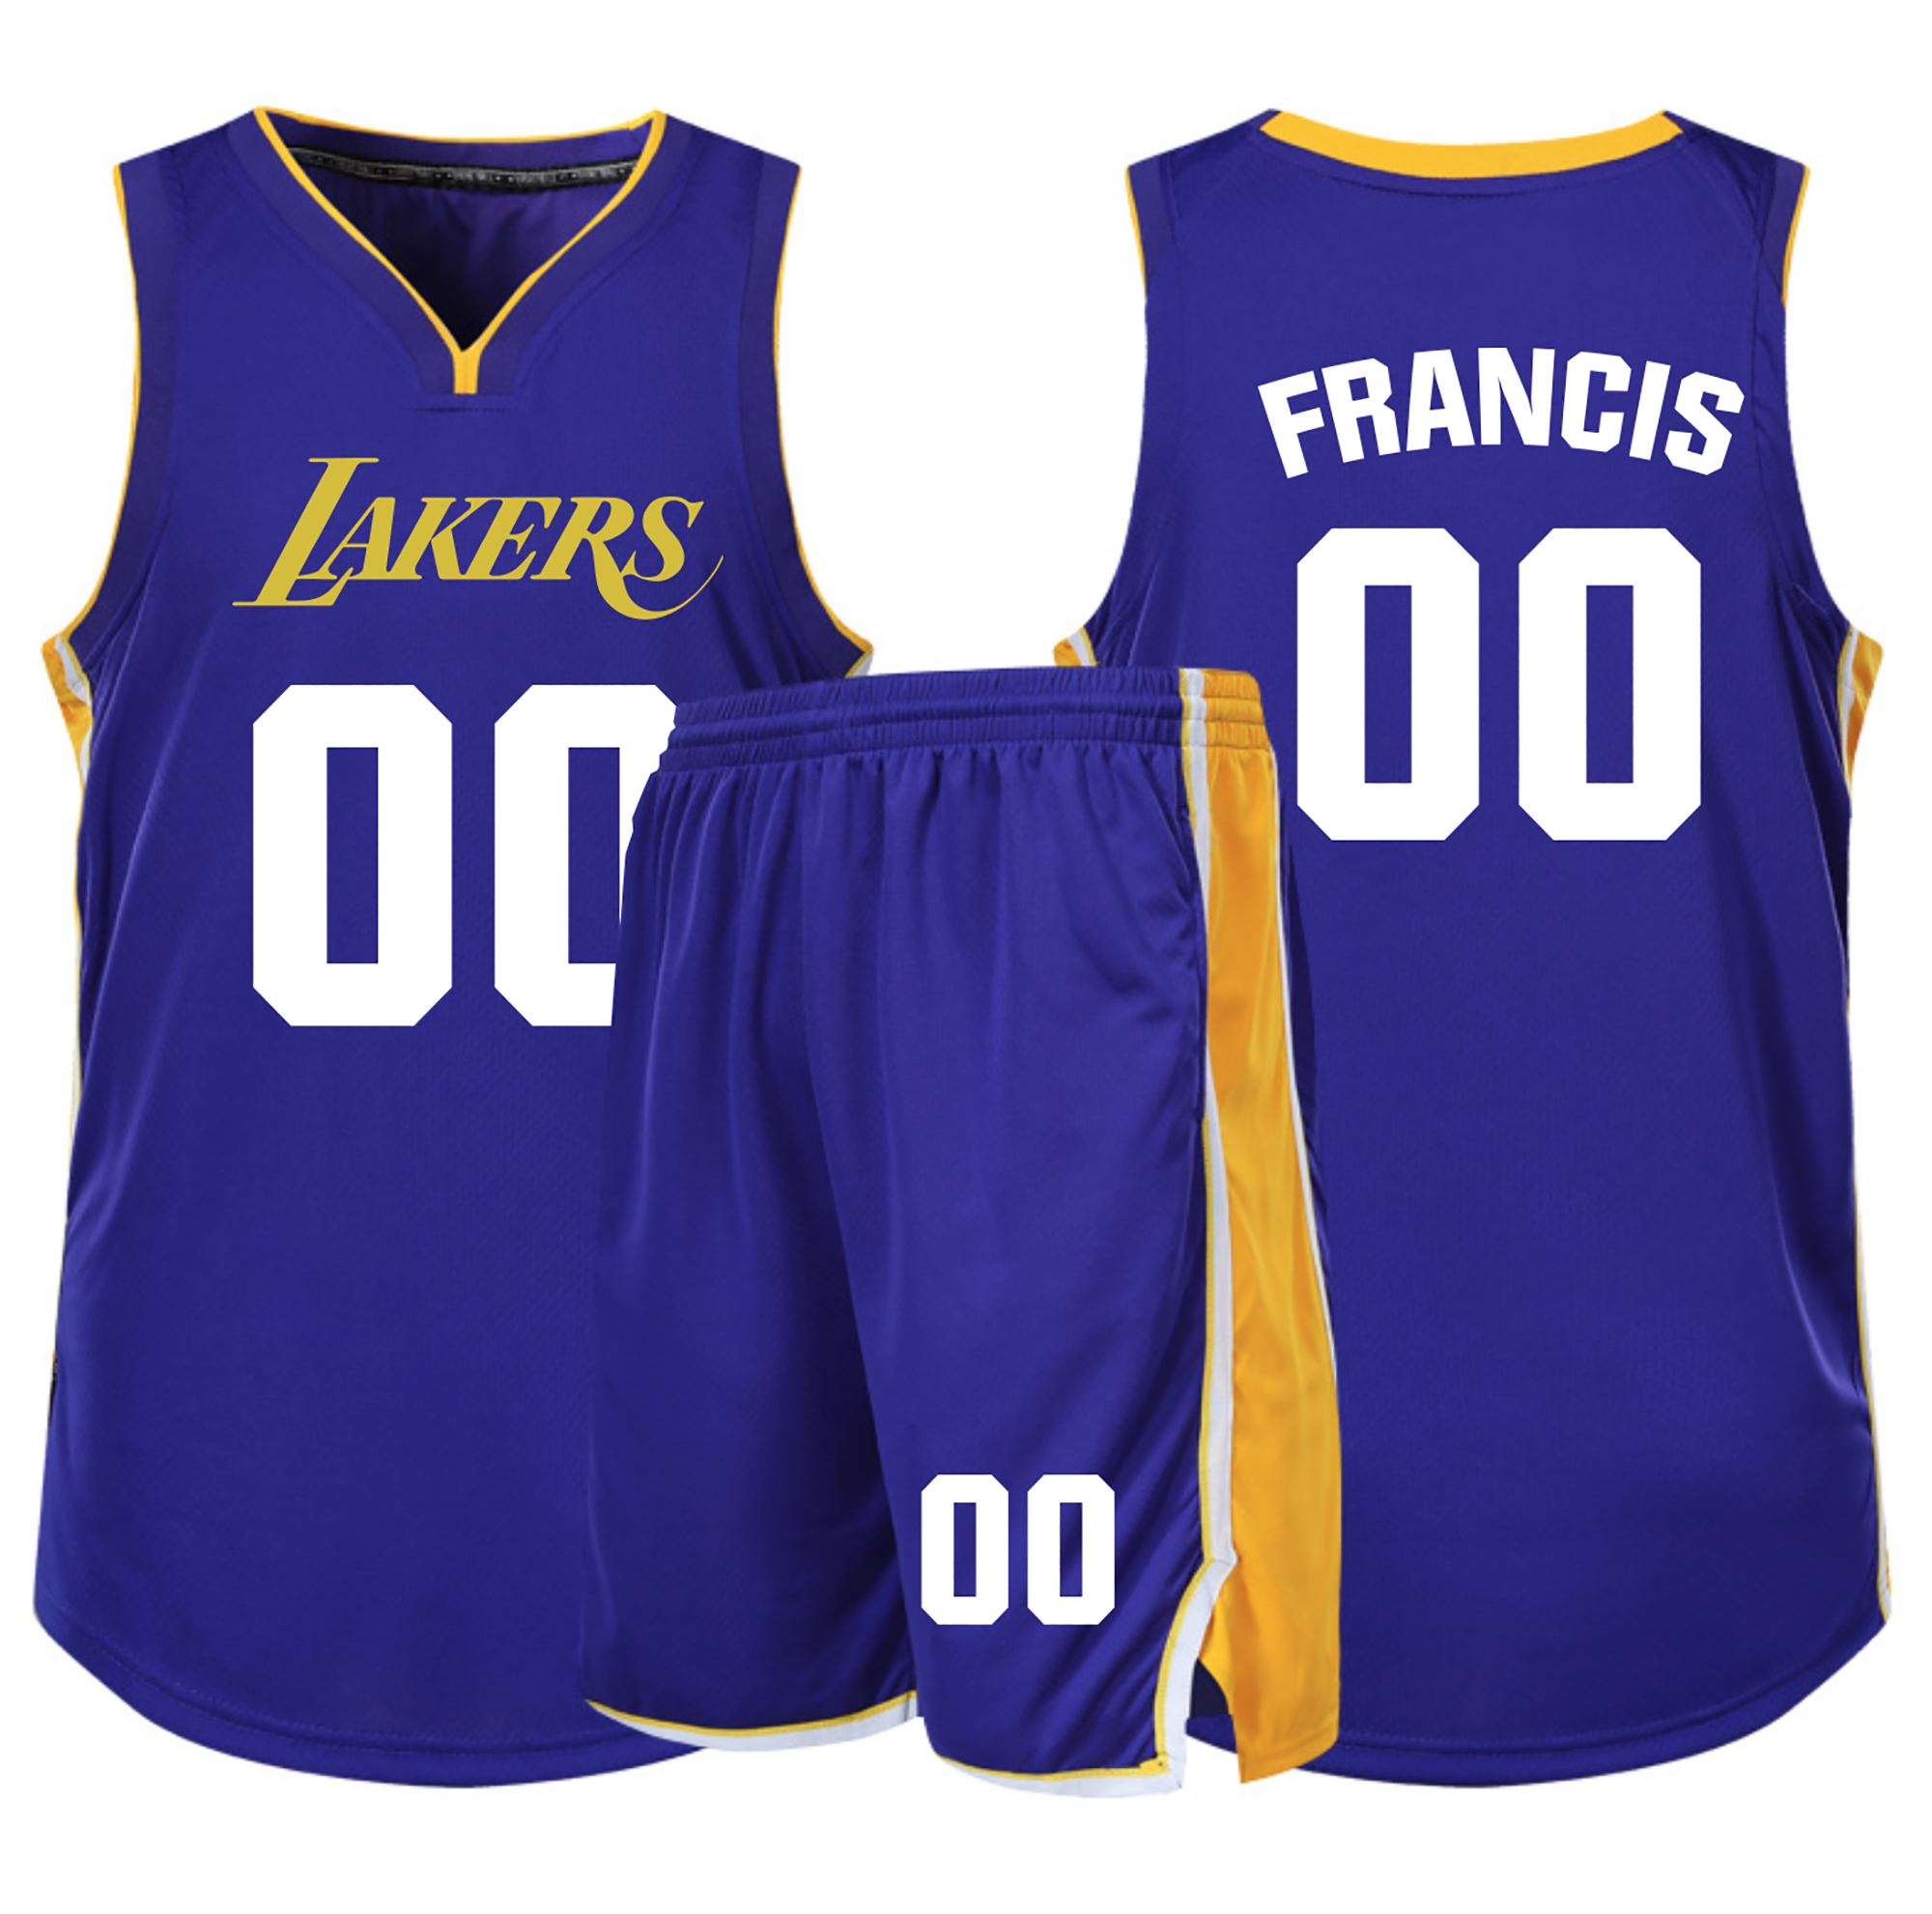 lakers jersey your name